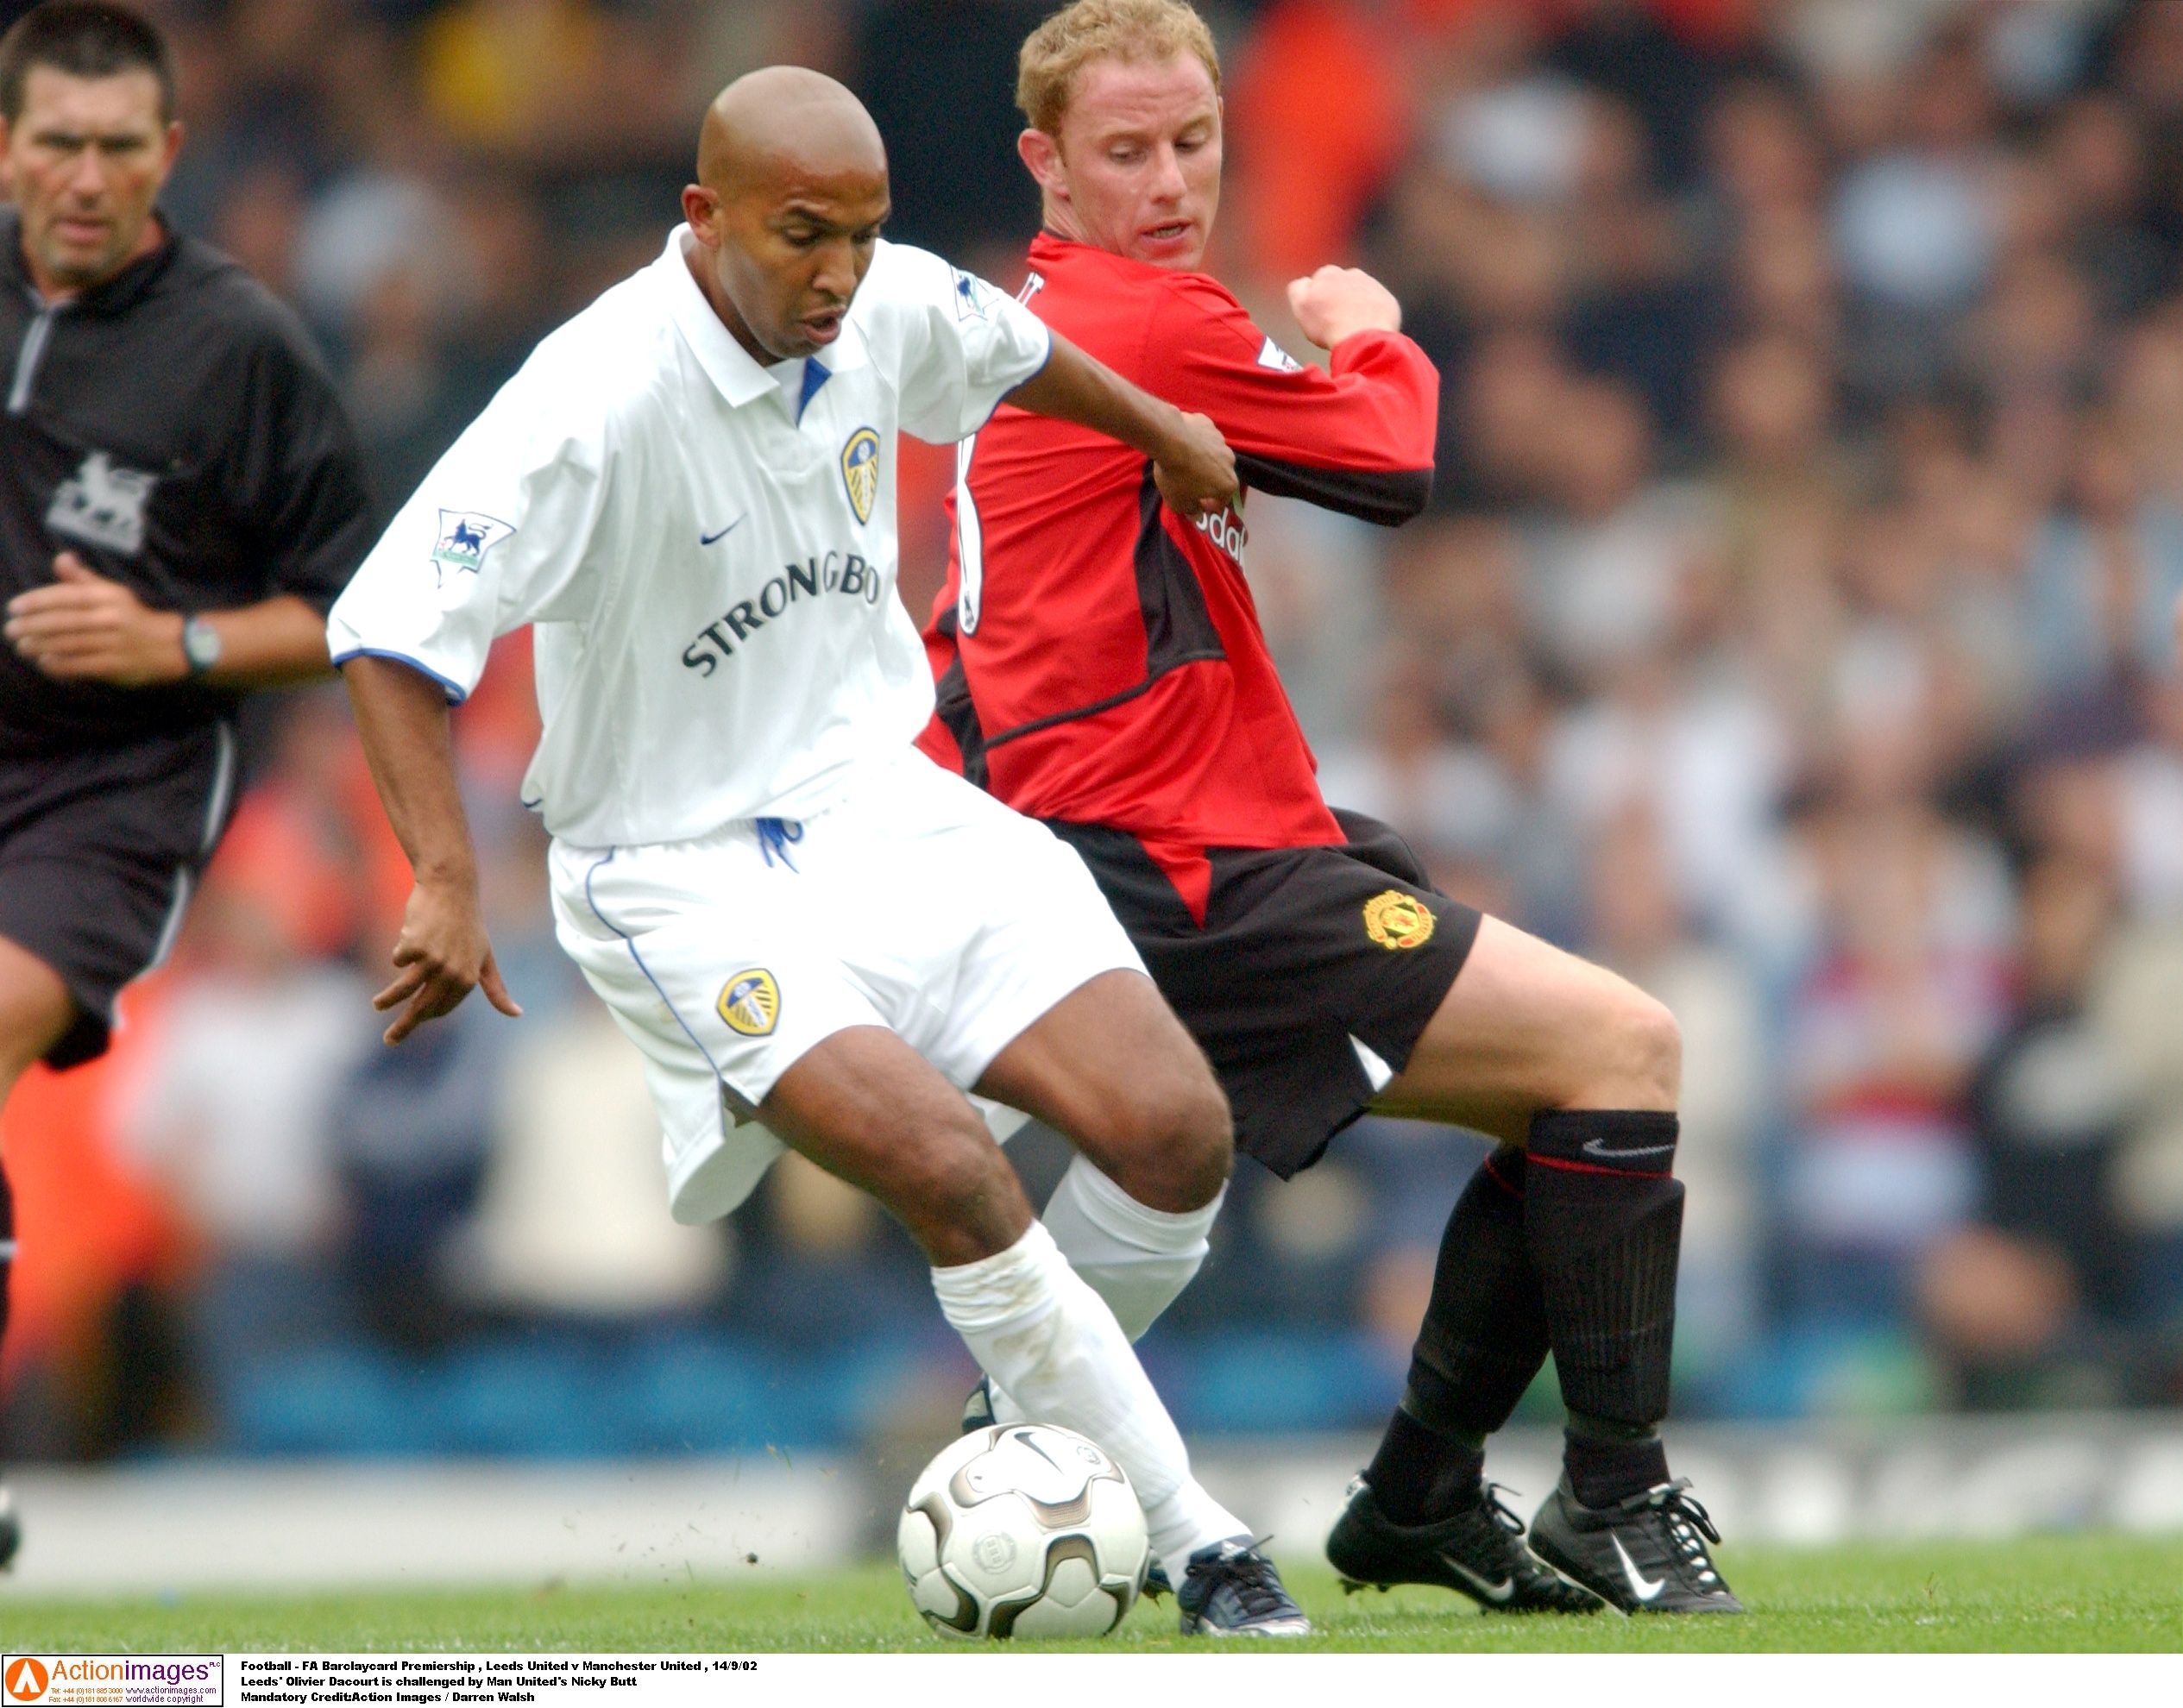 Football - FA Barclaycard Premiership , Leeds United v Manchester United , 14/9/02 
Leeds' Olivier Dacourt is challenged by Man United's Nicky Butt 
Mandatory Credit:Action Images / Darren Walsh